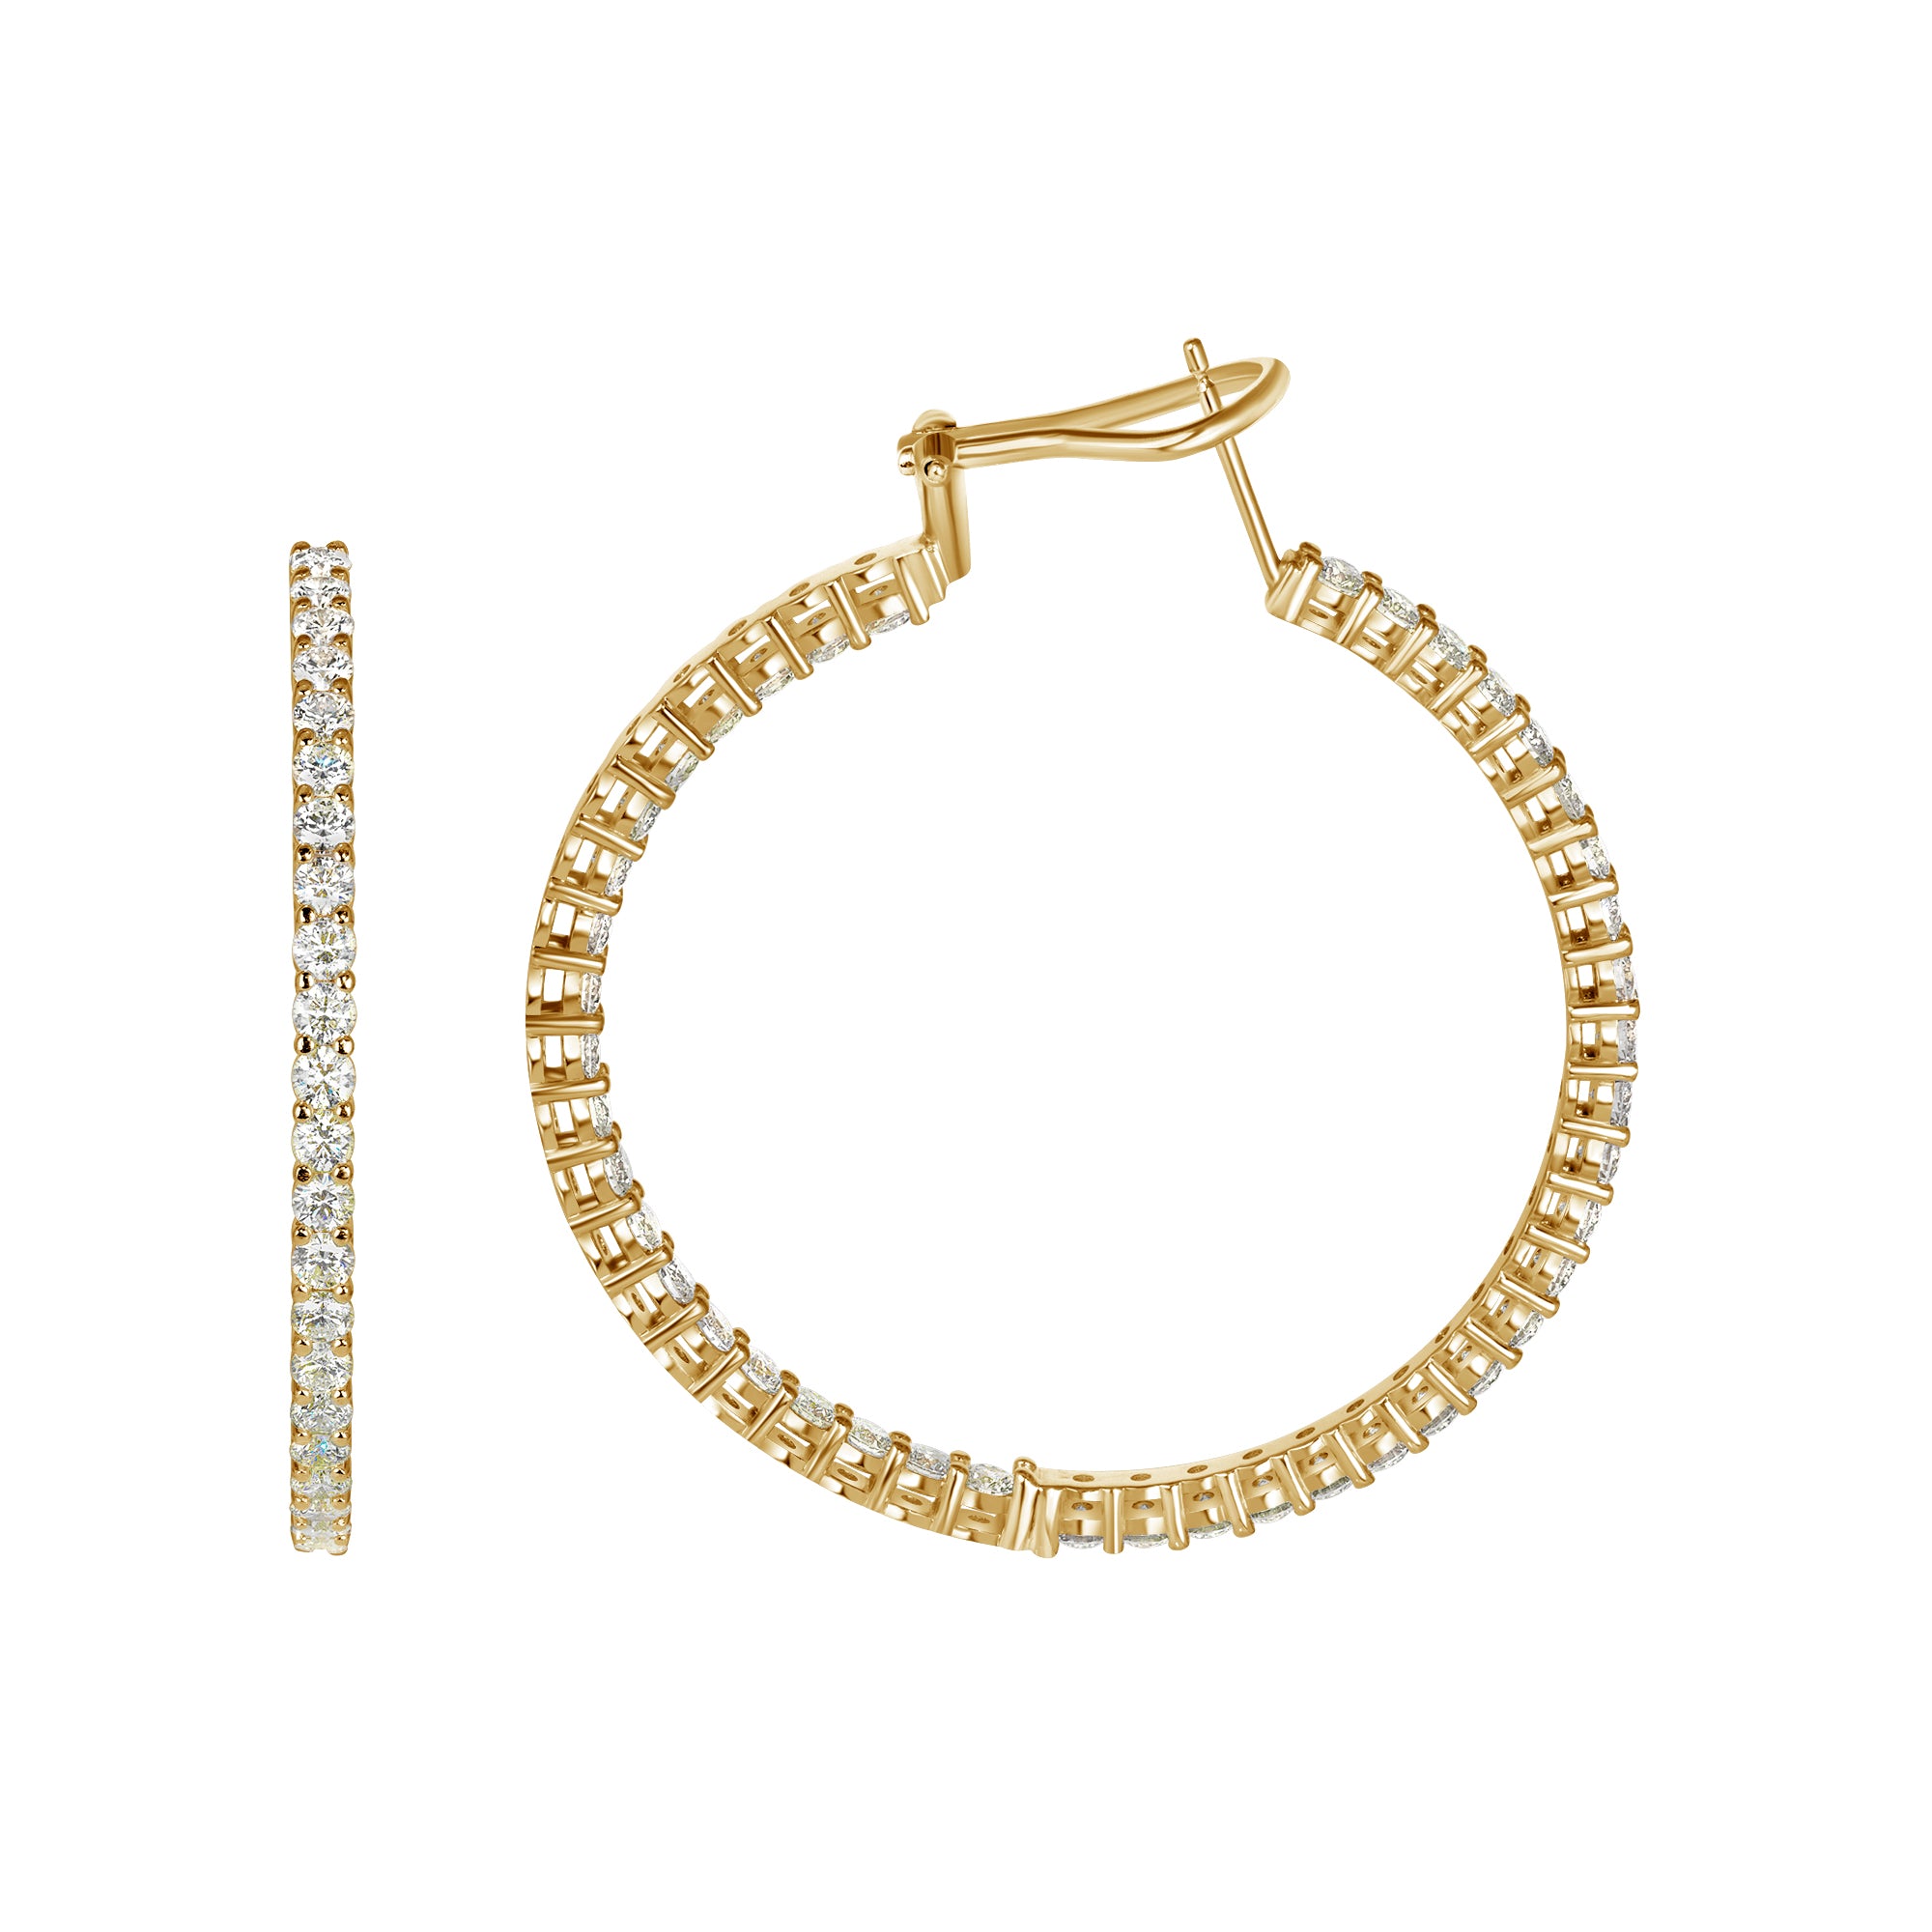 Round Cut Diamond Inside-Out Hoop Earrings in Yellow Gold